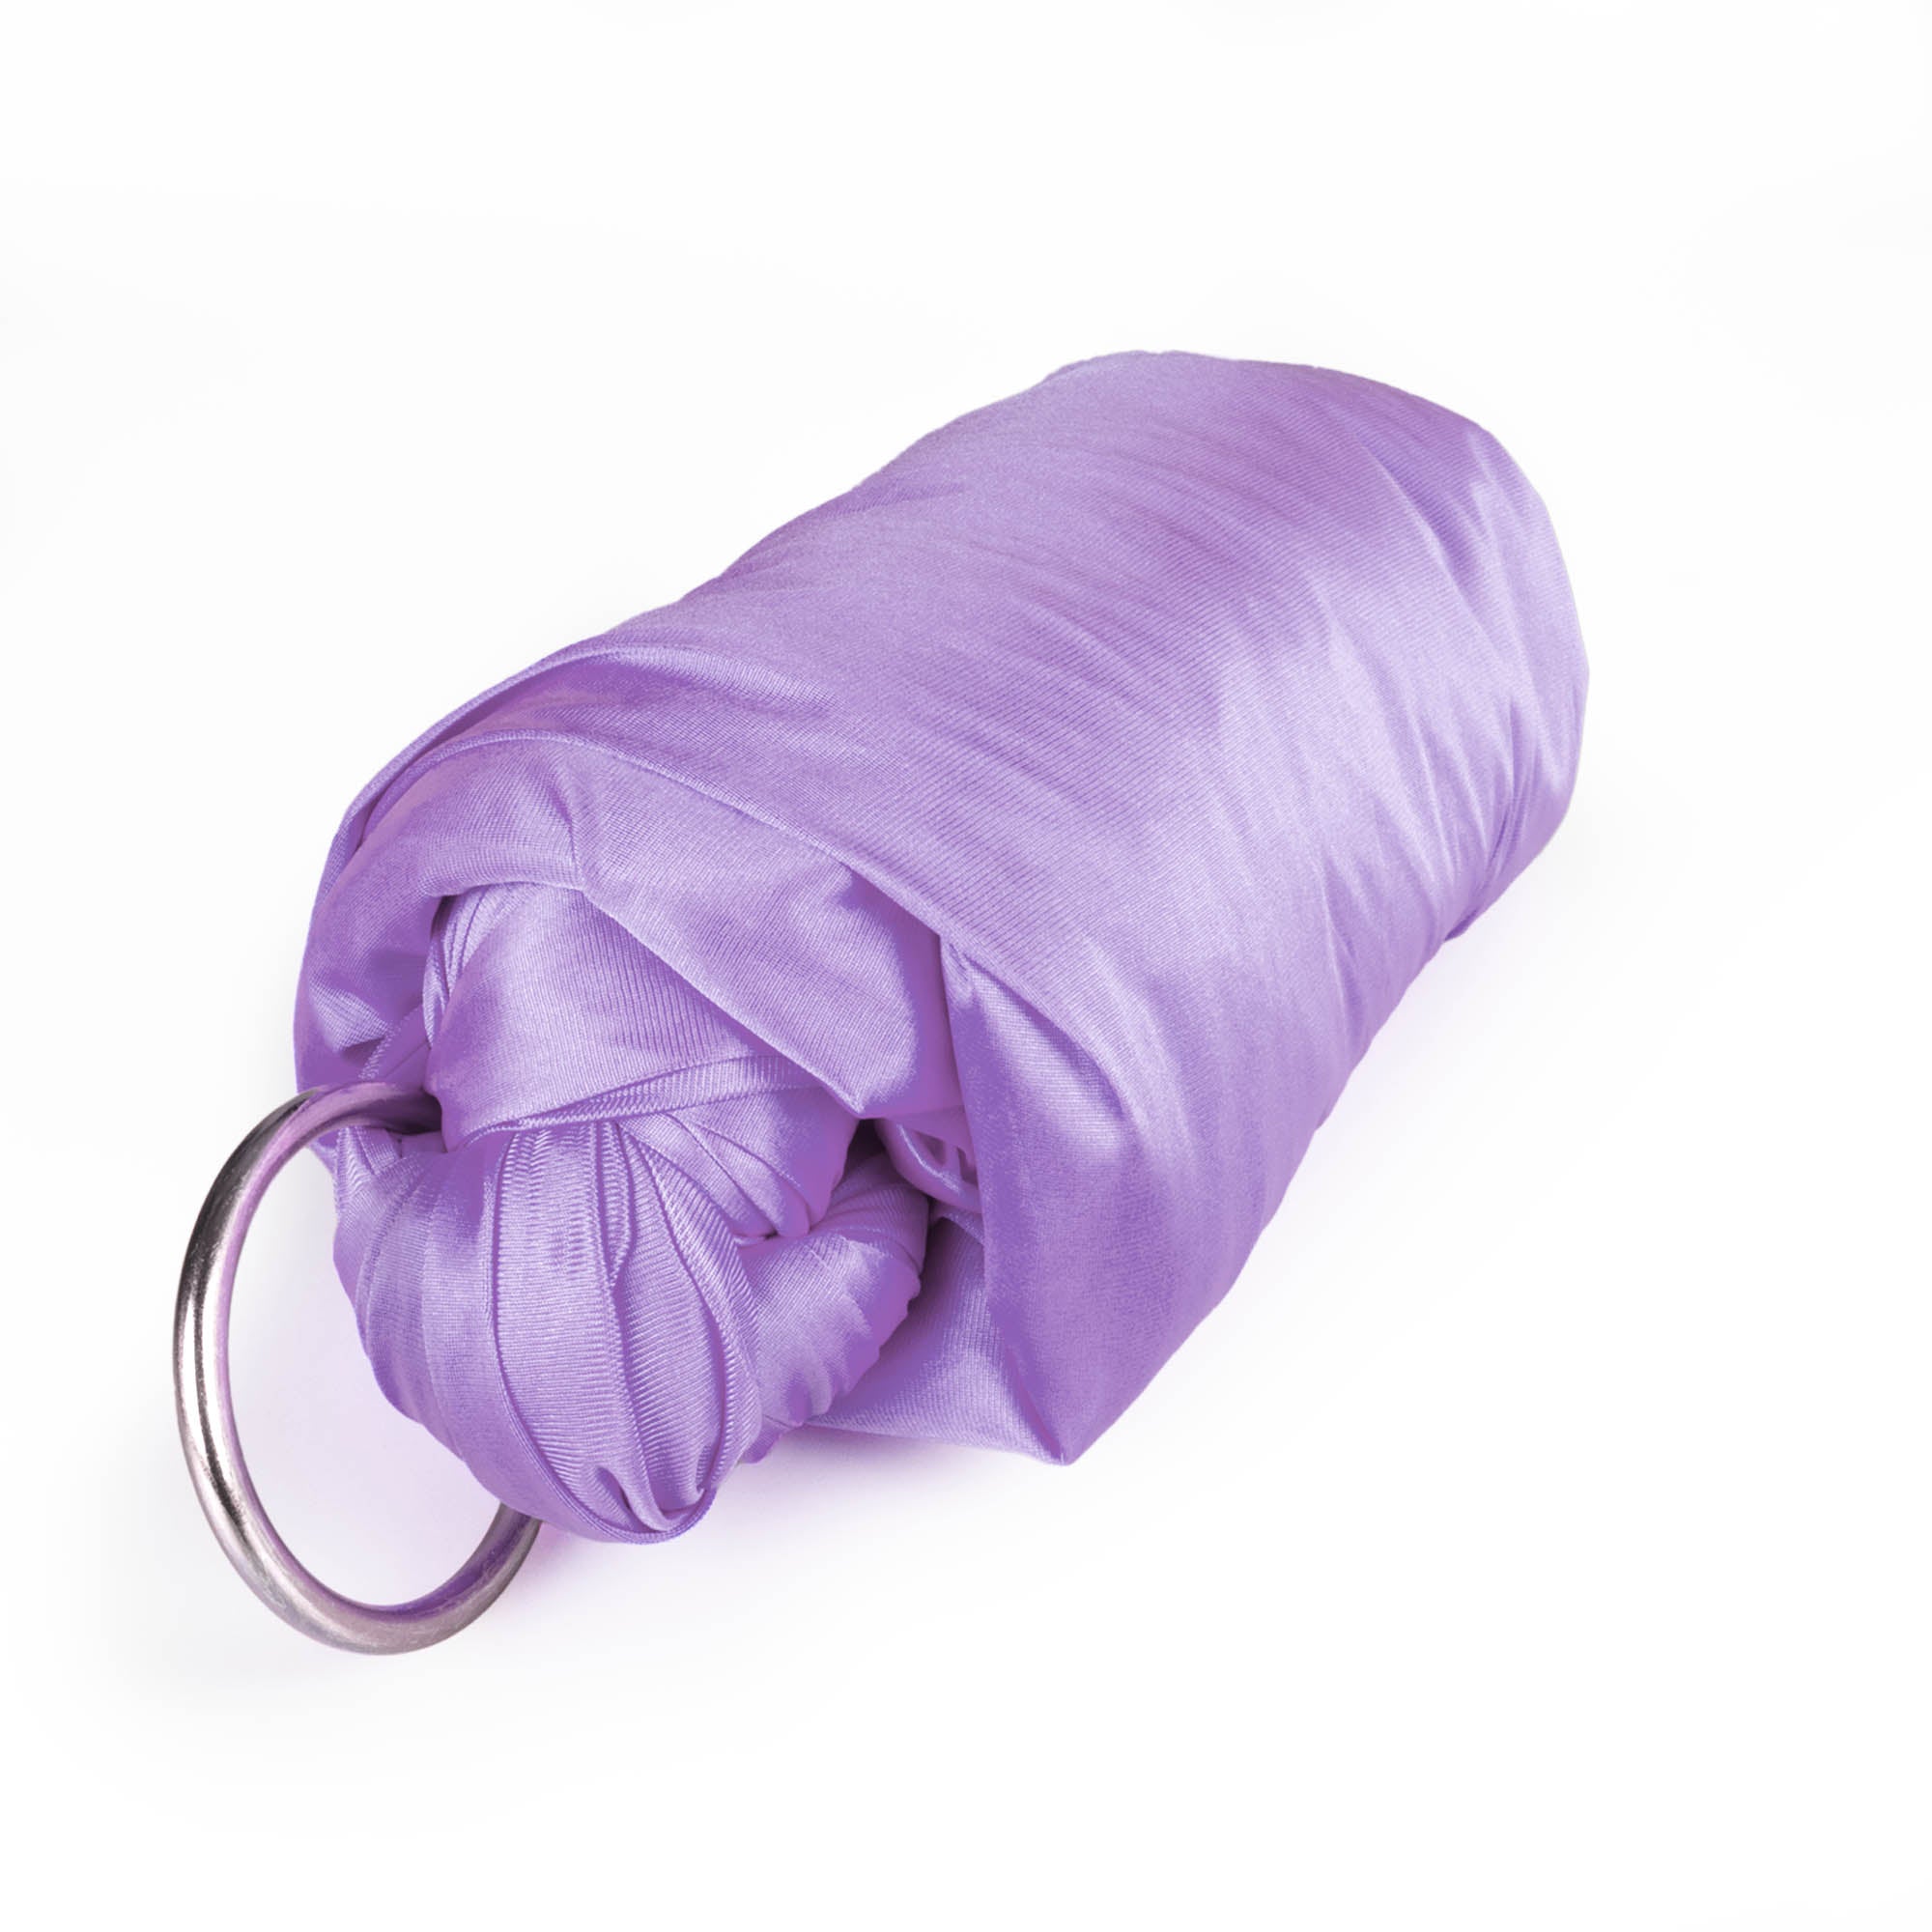 Lavender yoga hammock rolled up with ring attached